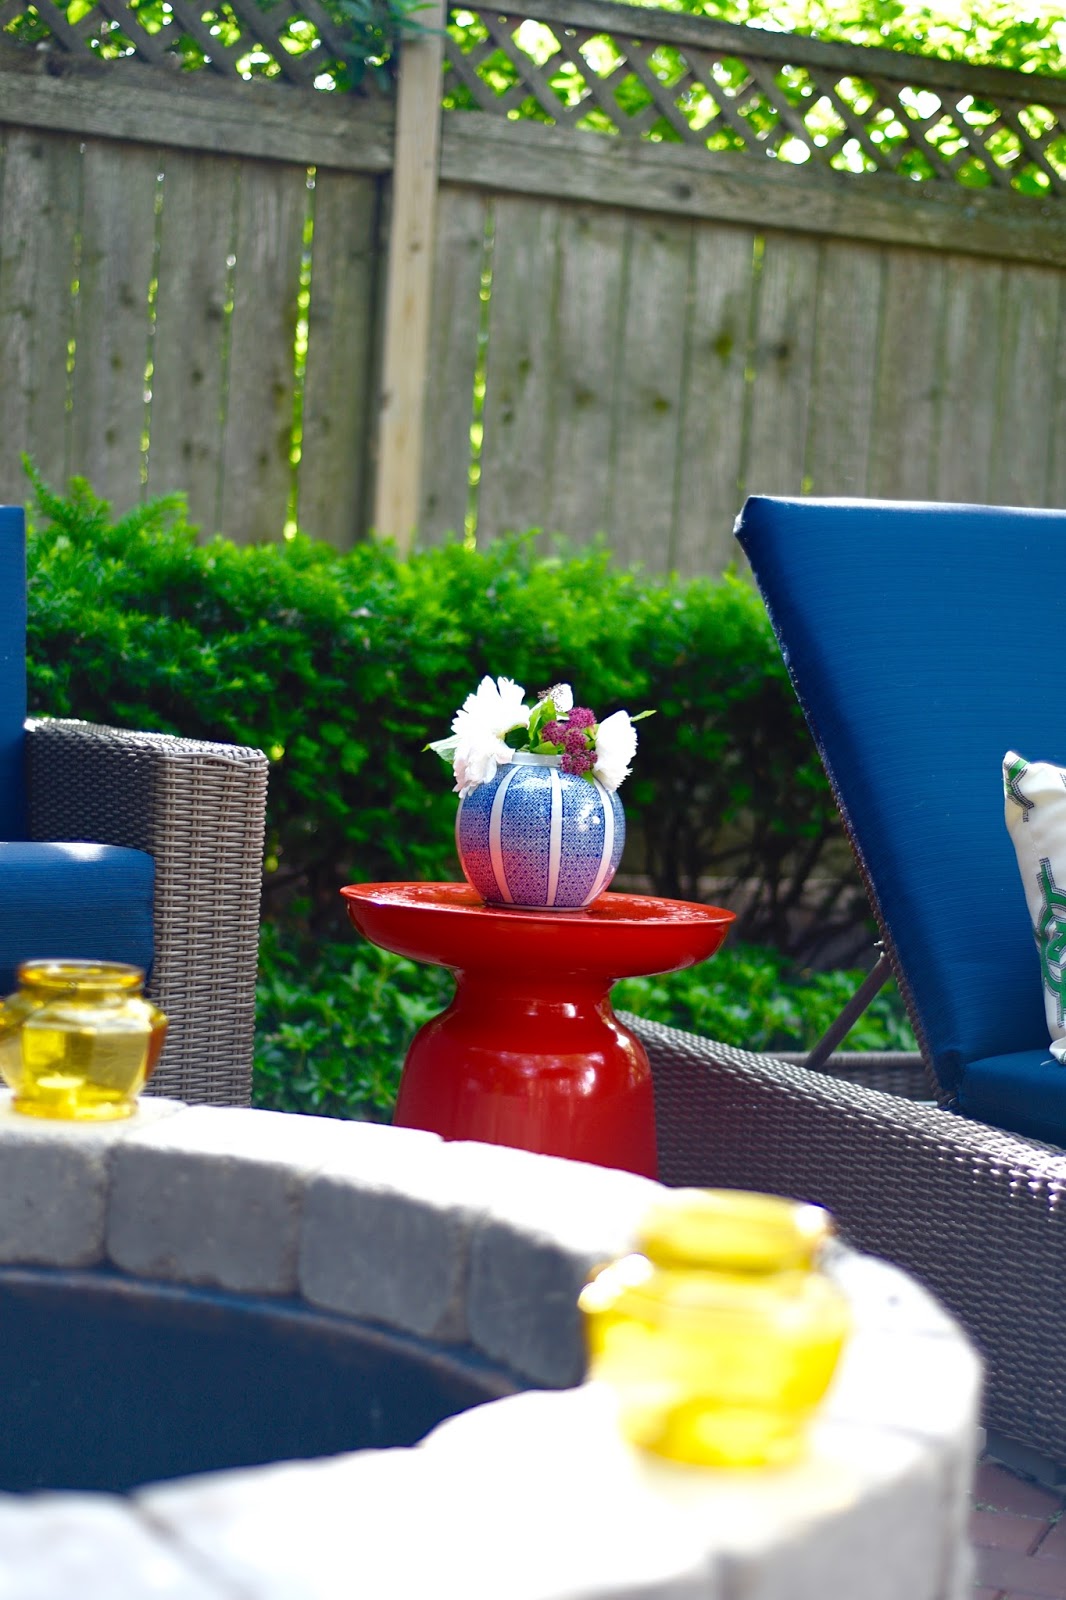 Outdoor furniture sale memorial weekend to decorate the patio, deck or backyard all styles on sale see more at www.homewithkeki.com #ad #sponsored with @costplusworldmarket